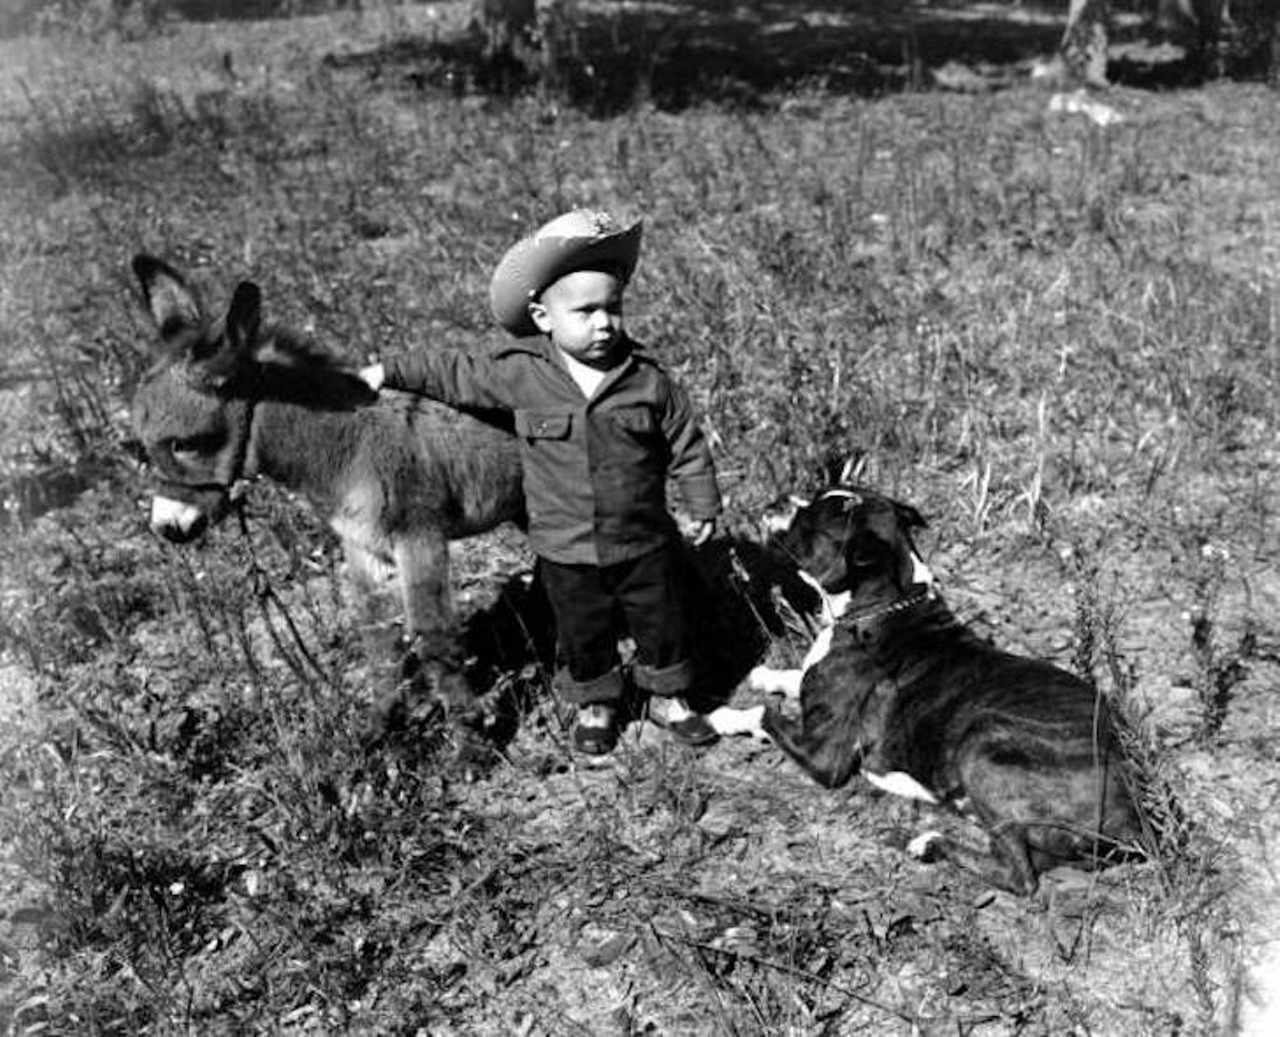 A young boy with Sicilian donkey and dog, photographed in November 1950. An accompanying note says, "The grandson of George Garretson, owner of Palomino stables in Ocala, with Sicilian donkey."